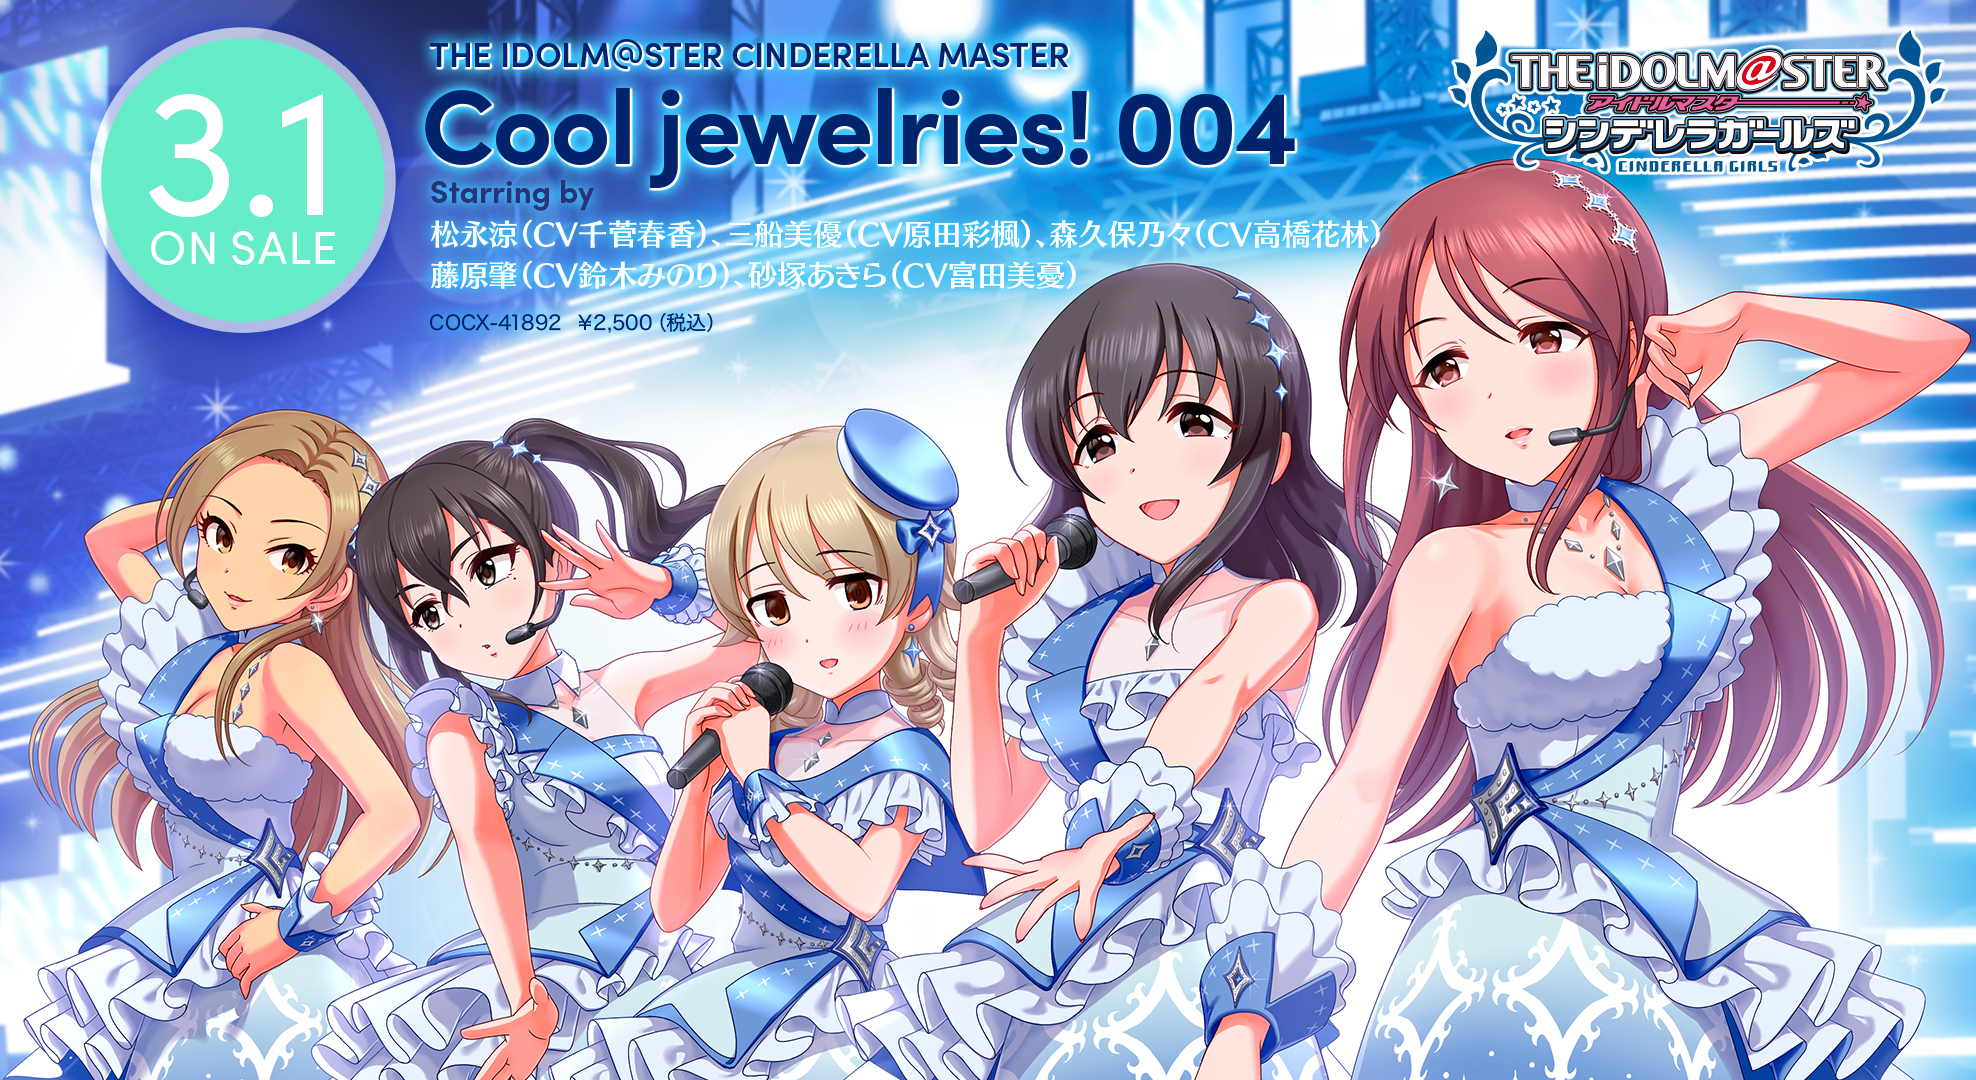 THE IDOLM@STER CINDERELLA MASTER　Cool jewelries! 004